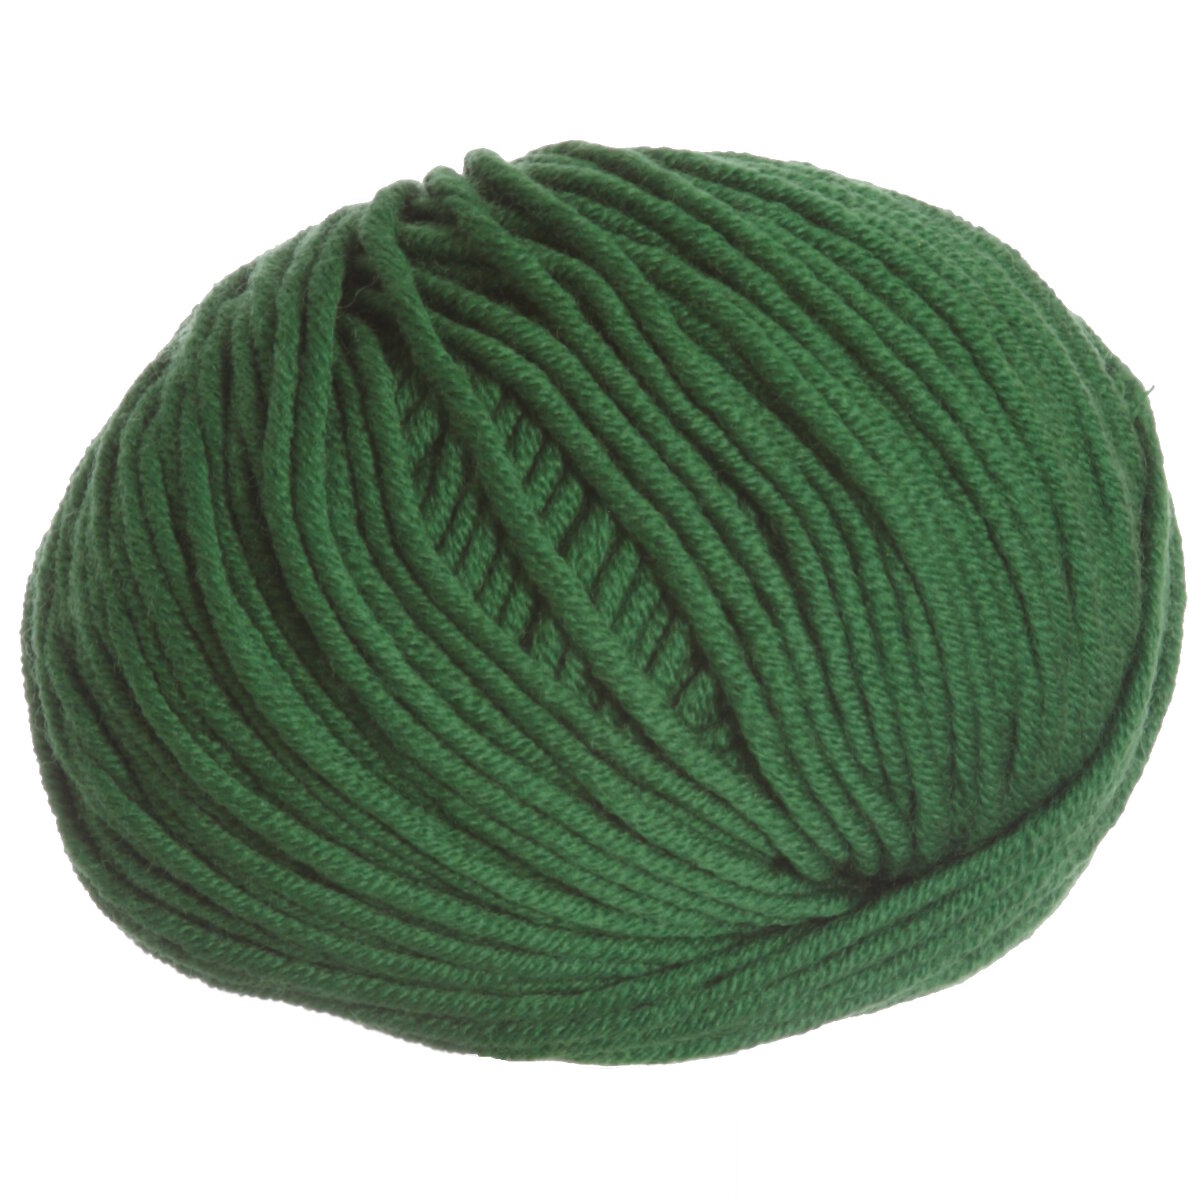 Zara Plus is a heavy worsted weight yarn that combines high-quality ...